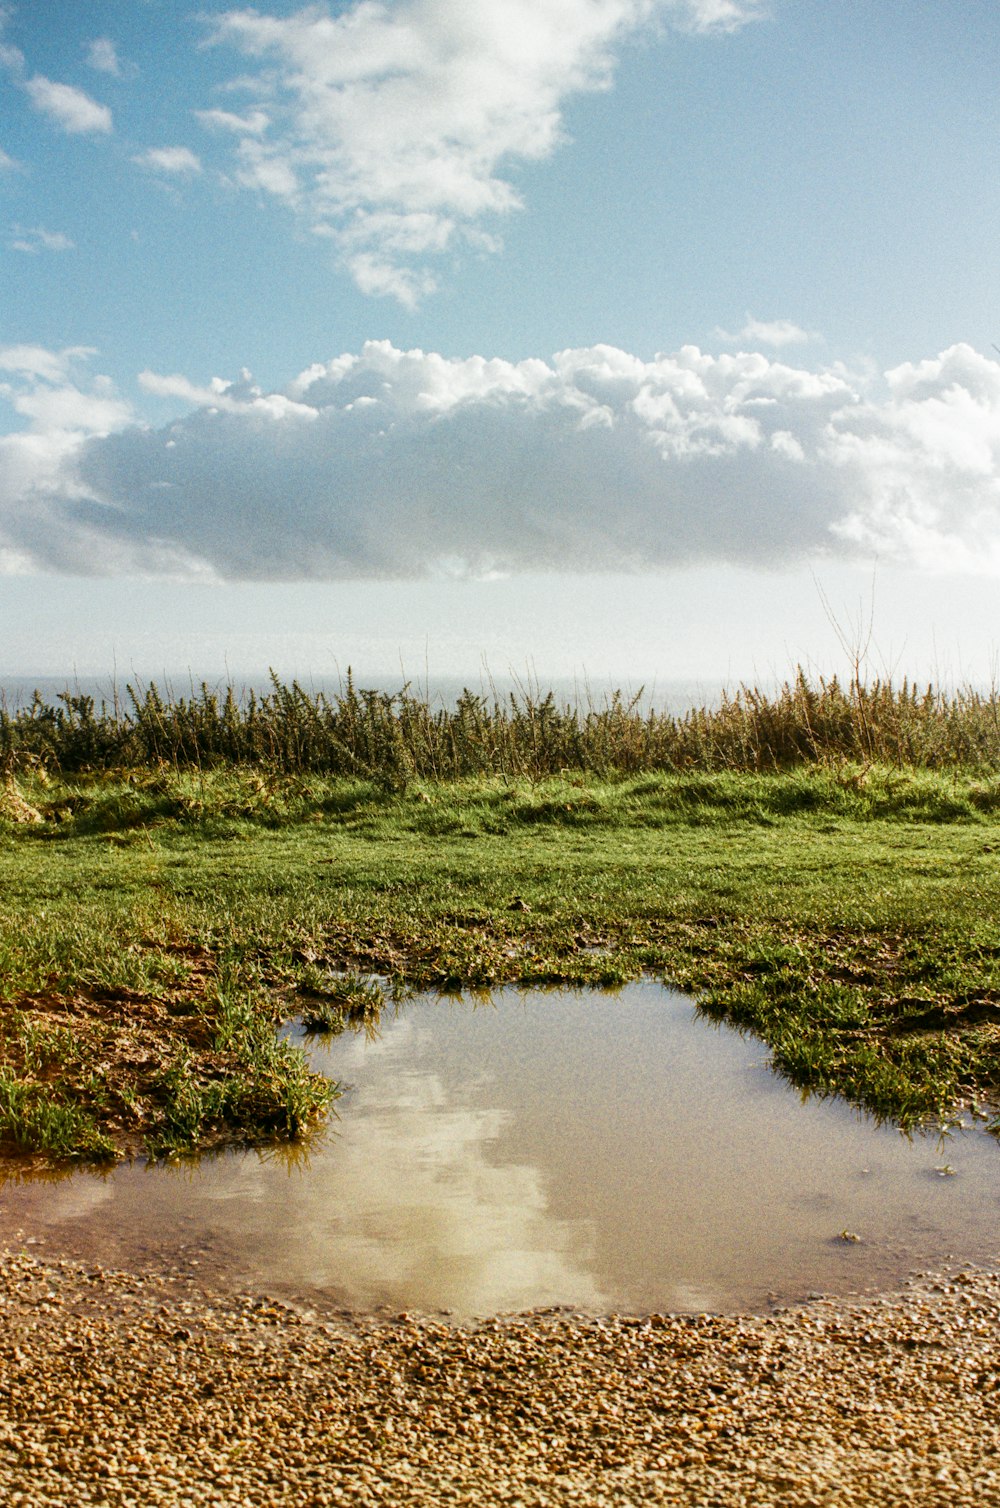 a small puddle of water in a grassy field